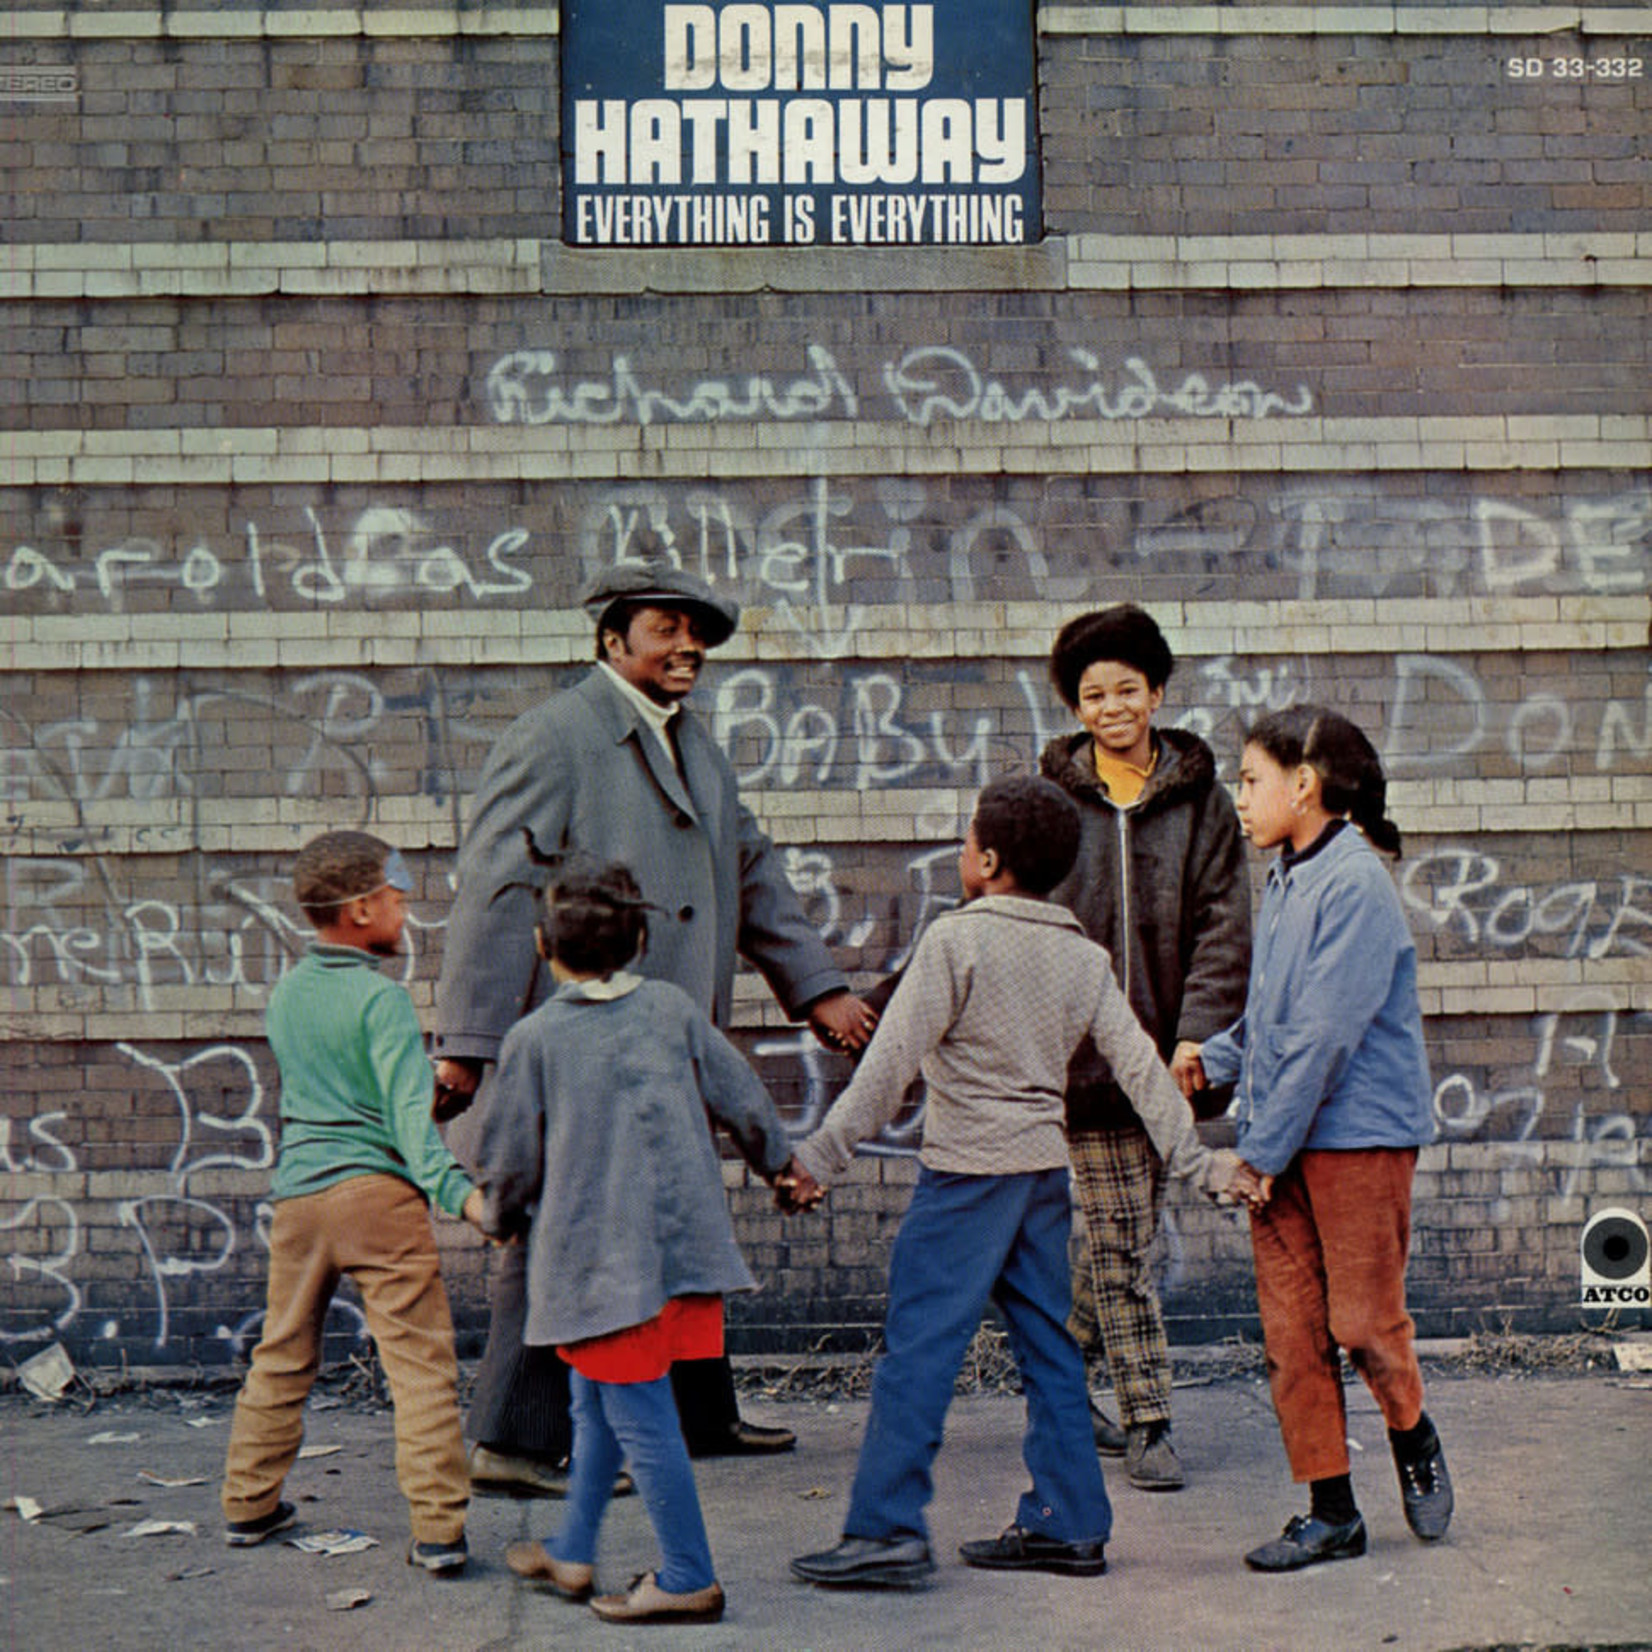 [New] Donny Hathaway - Everything Is Everything